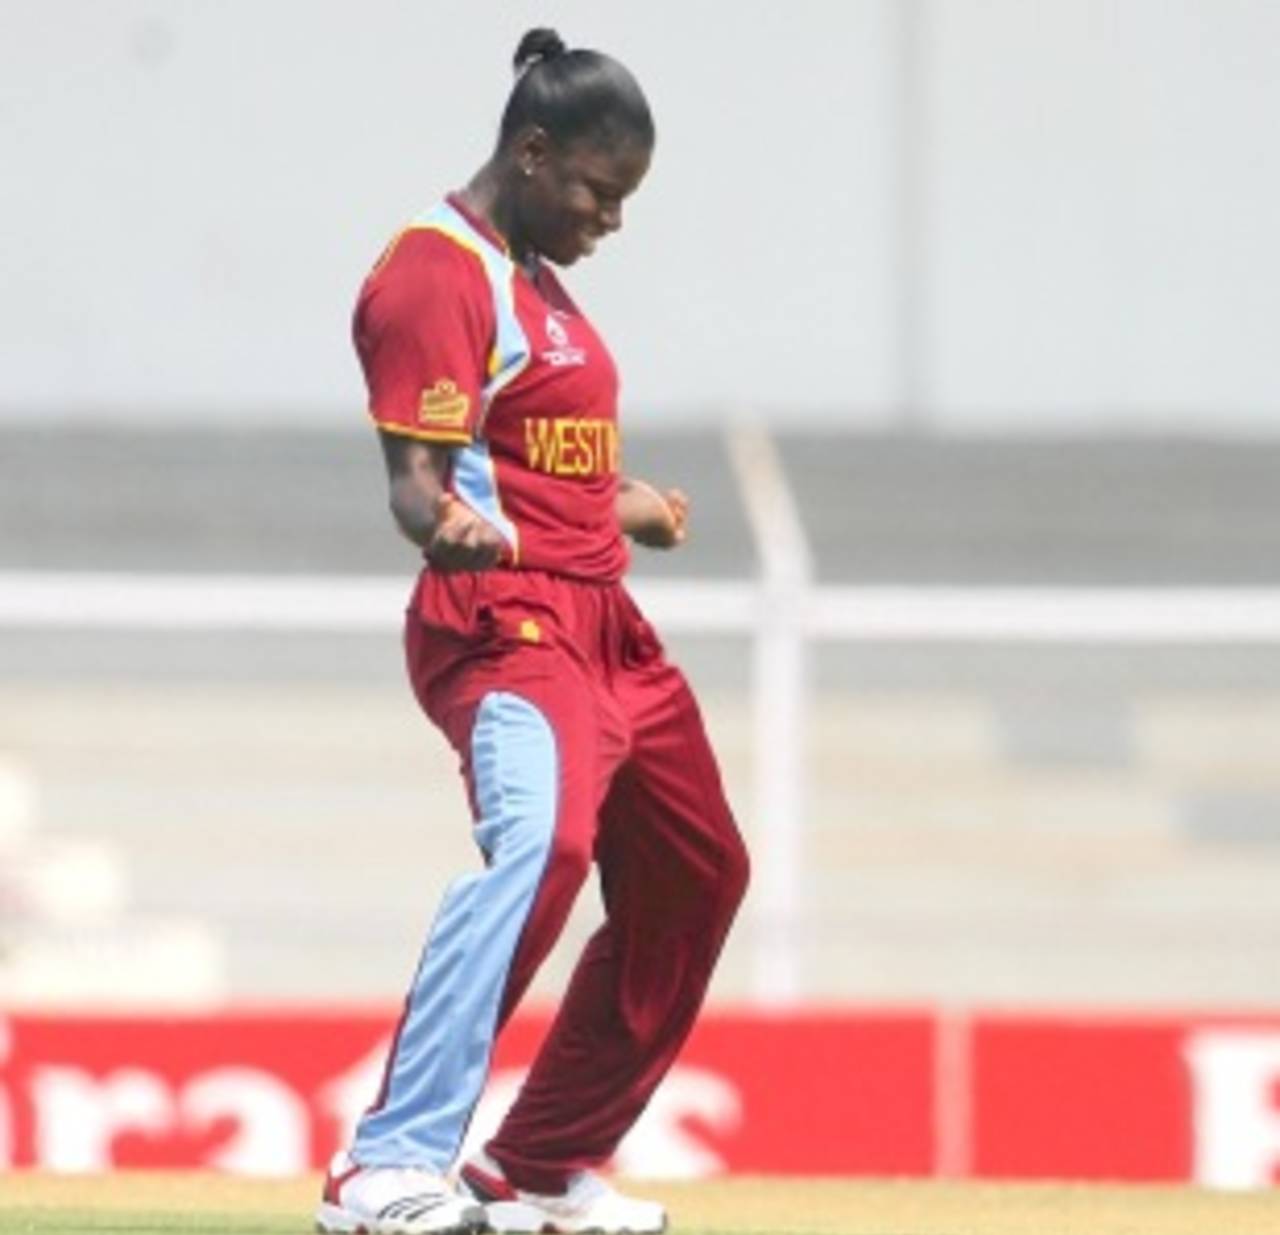 Tremayne Smartt breaks into a dance after picking up a wicket, New Zealand v West Indies, Super Six match, Women's World Cup 2013, Mumbai,  February 11, 2013